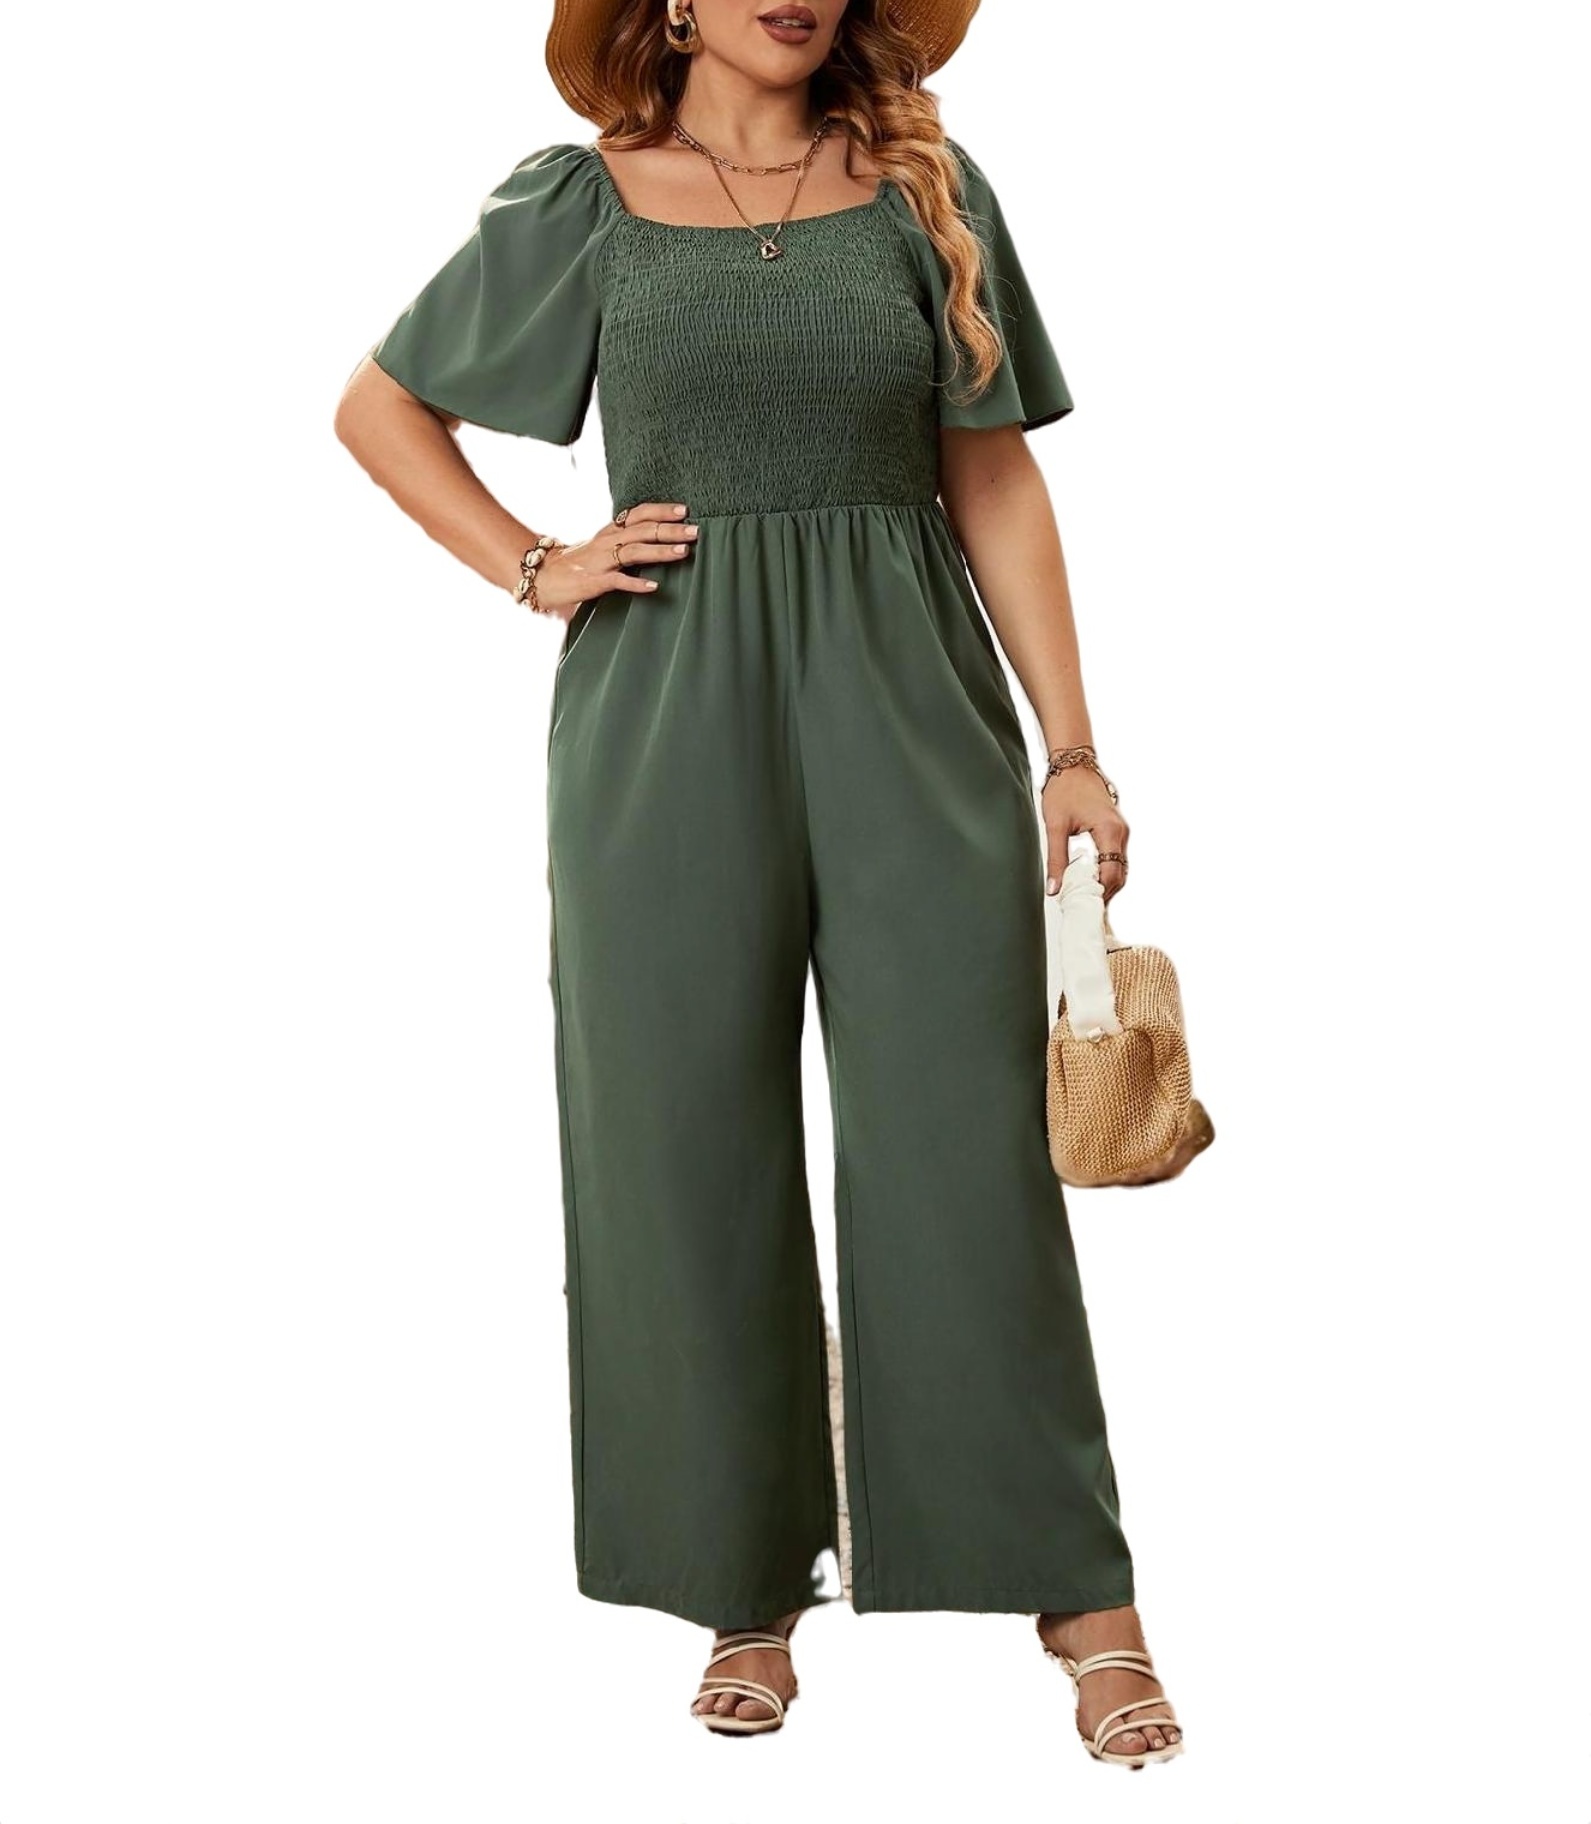 Casual Plain Square Neck Shirt Elbow-Length Army Green Plus Size ...